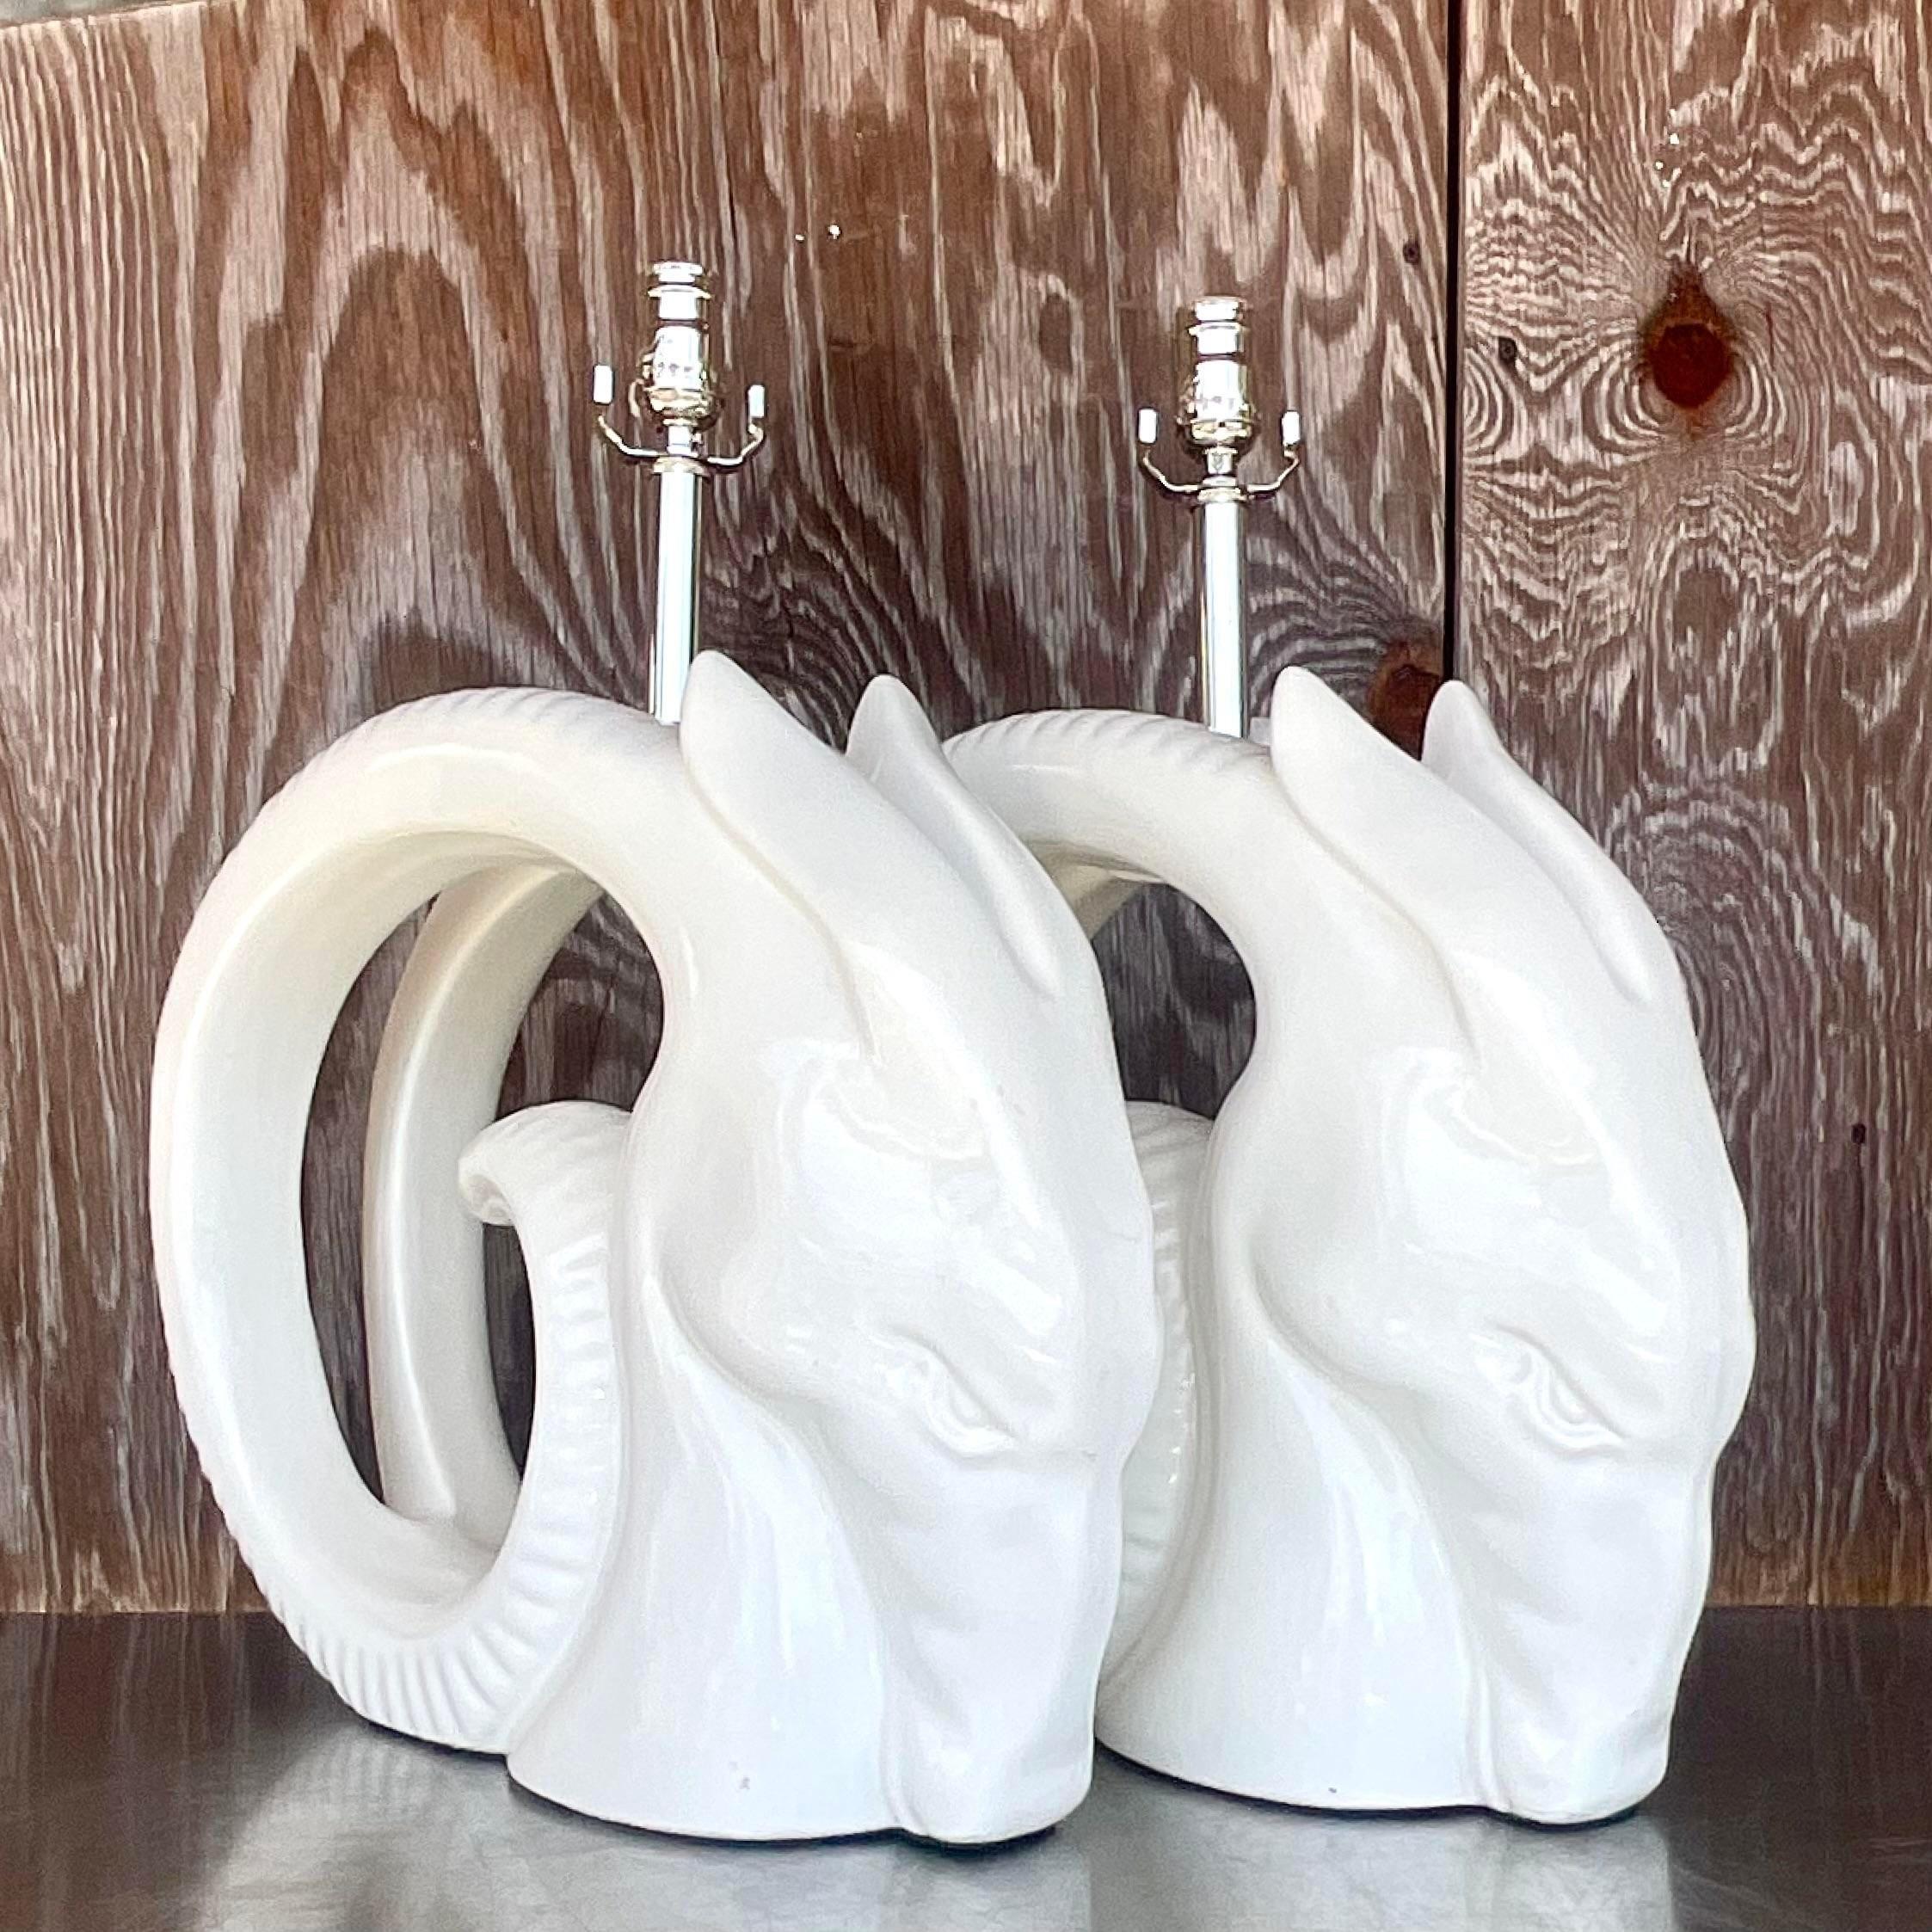 An extraordinary pair of vintage 80s table lamps. A chic pair of glazed ceramic rams heads in a high gloss finish. Monumental in size and drama. Fully restored with all new hardware and wiring. Acquired from a Palm Beach estate.